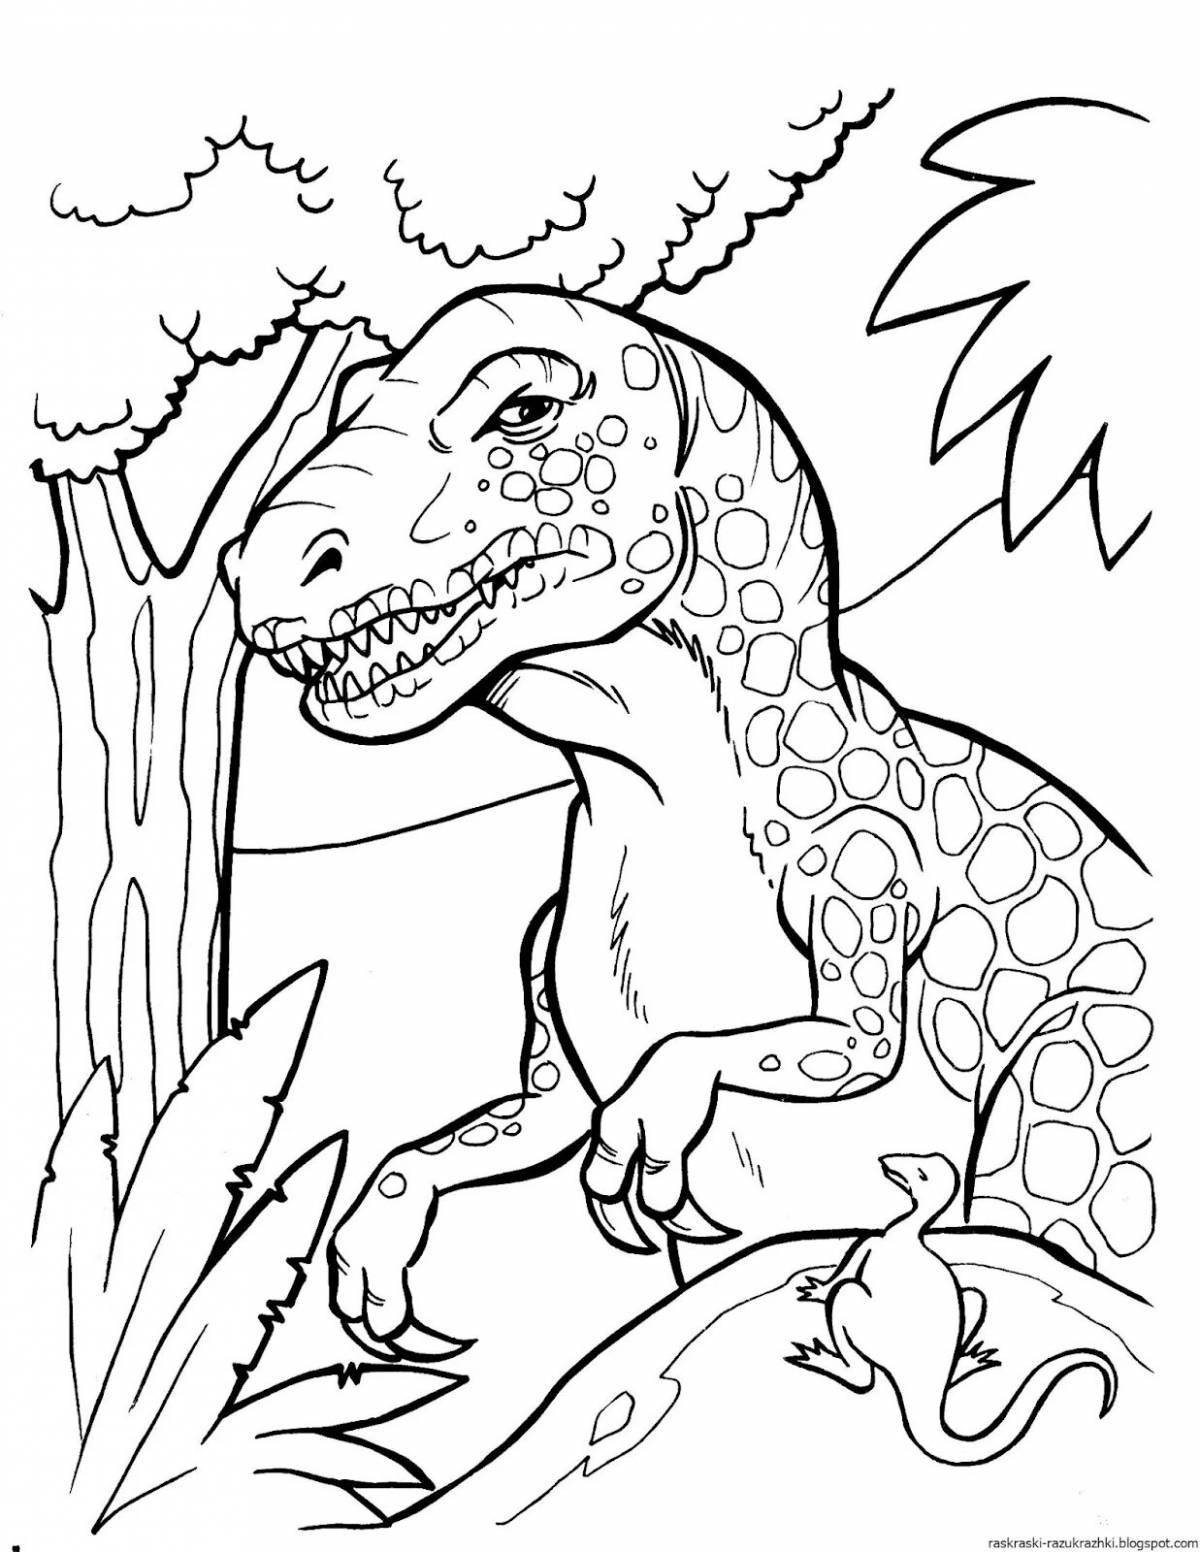 Coloring dinosaurs for boys 5-7 years old